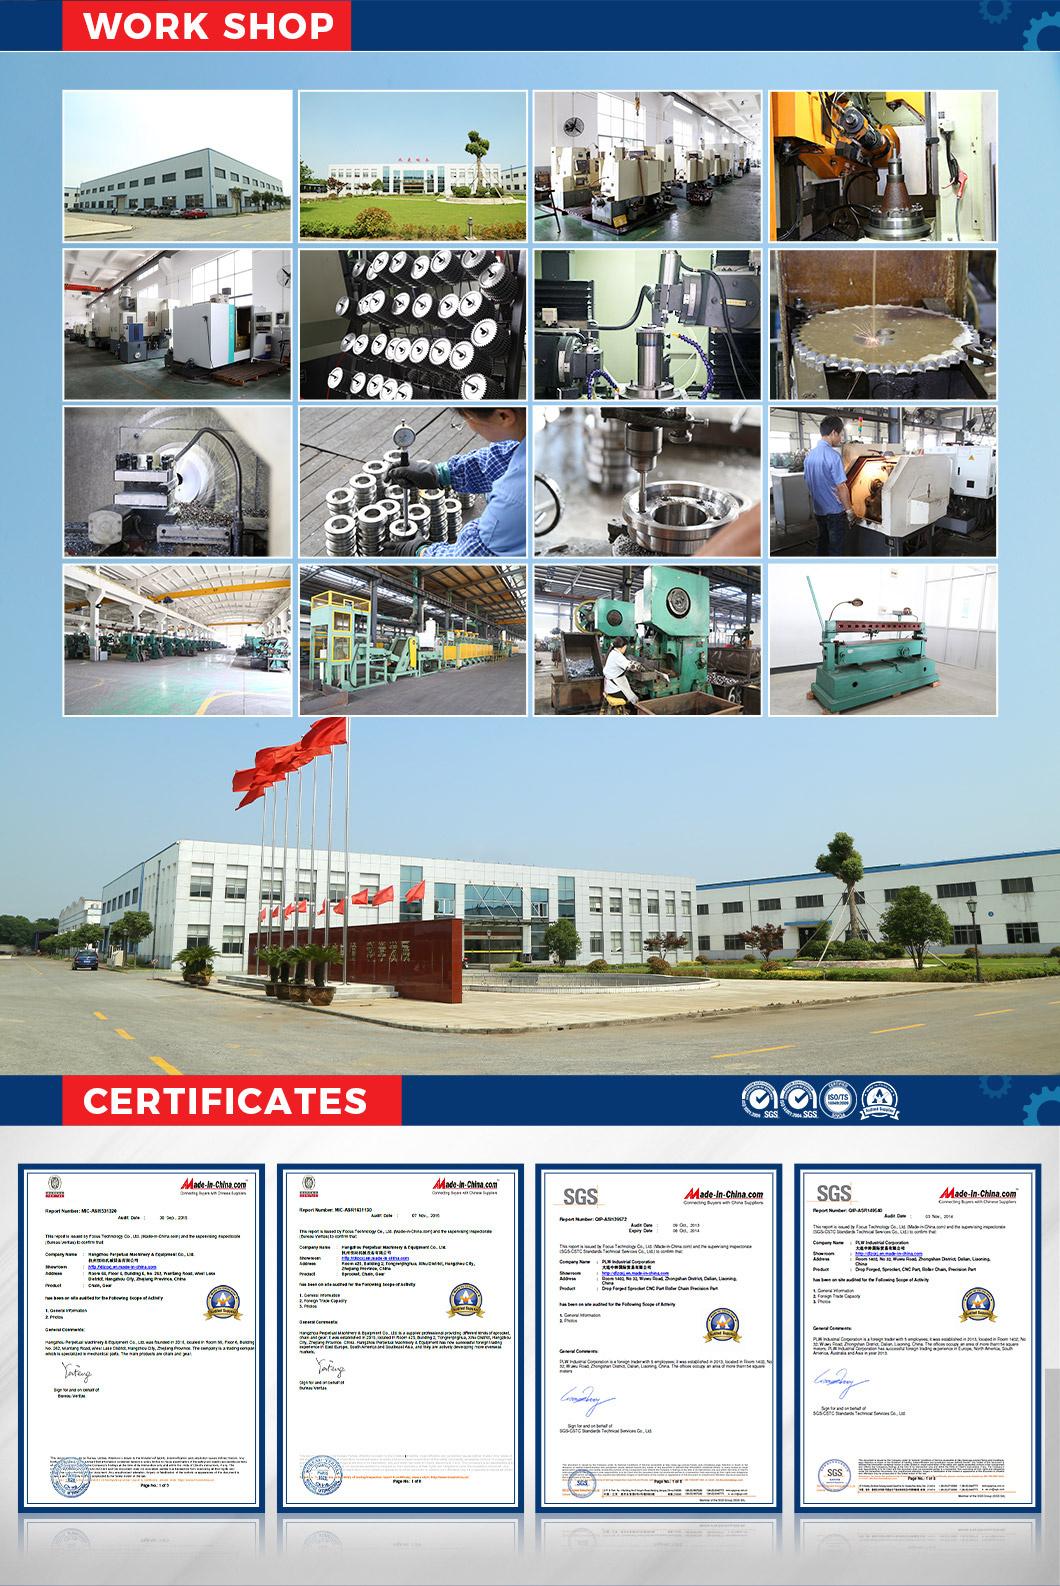 Engineering Industrial Machinery Agricultural Chain with Attachment